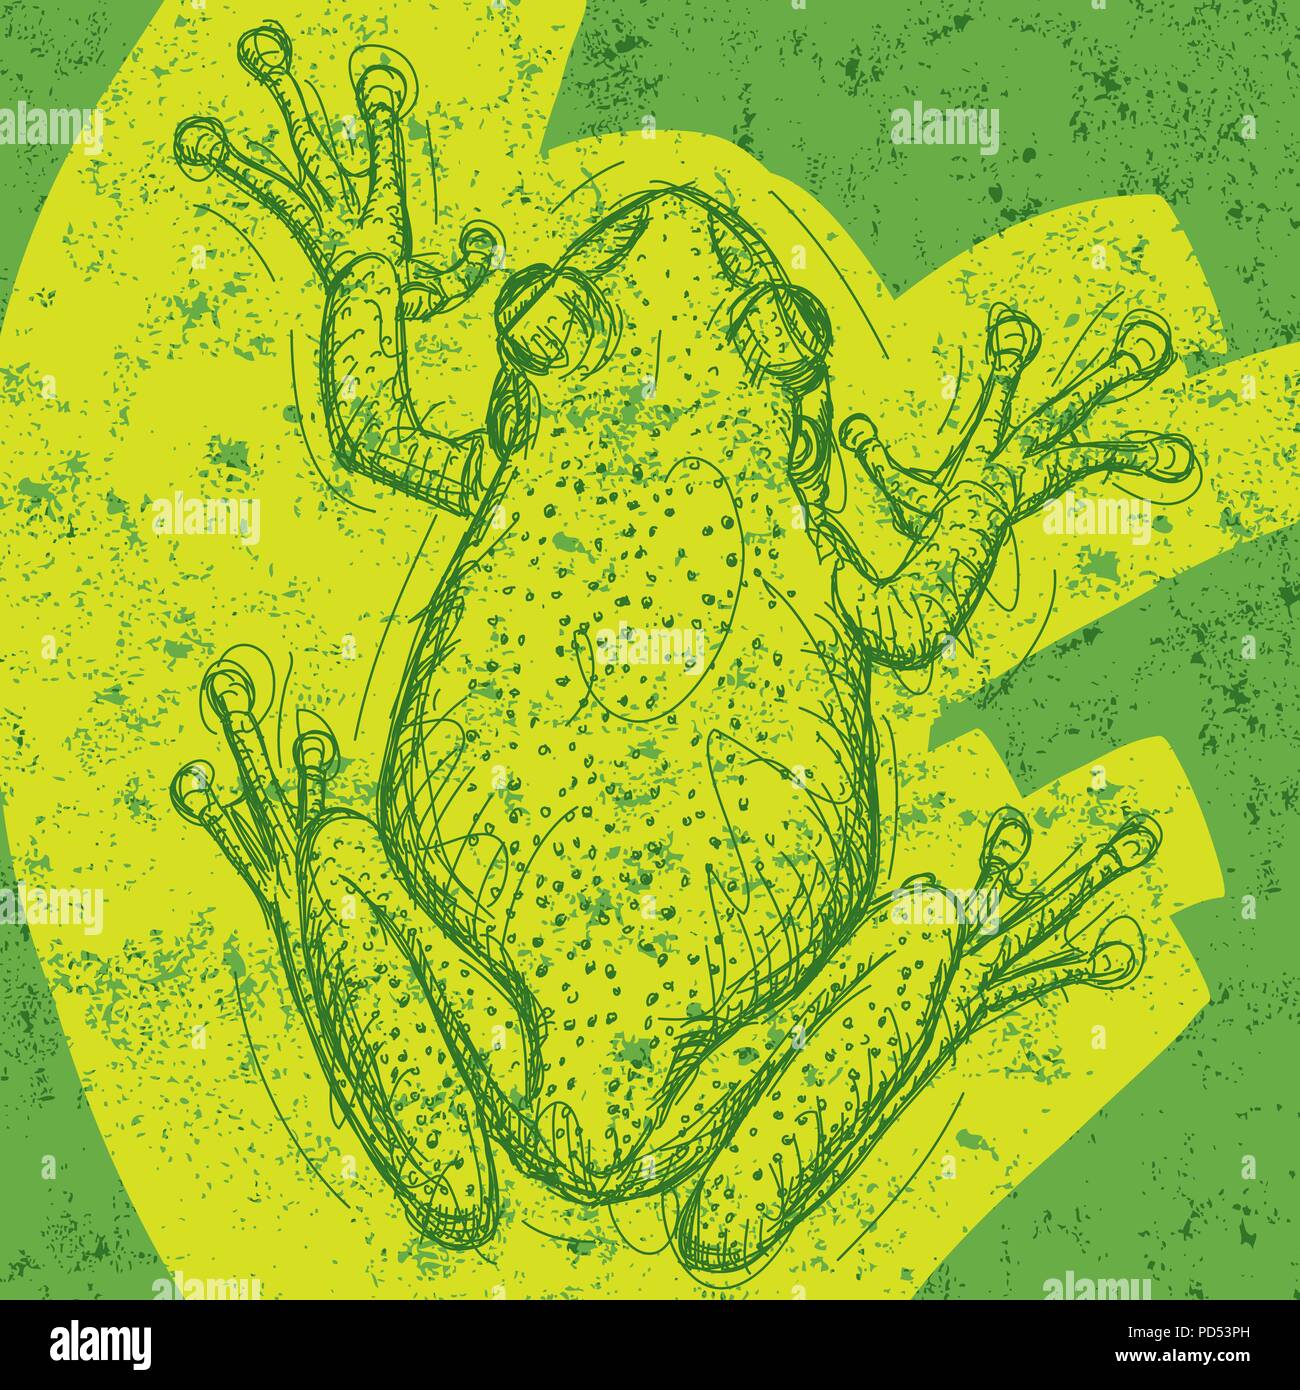 Frog background. Frog drawing over an abstract background.The artwork and background are on separate labeled layers. Stock Vector